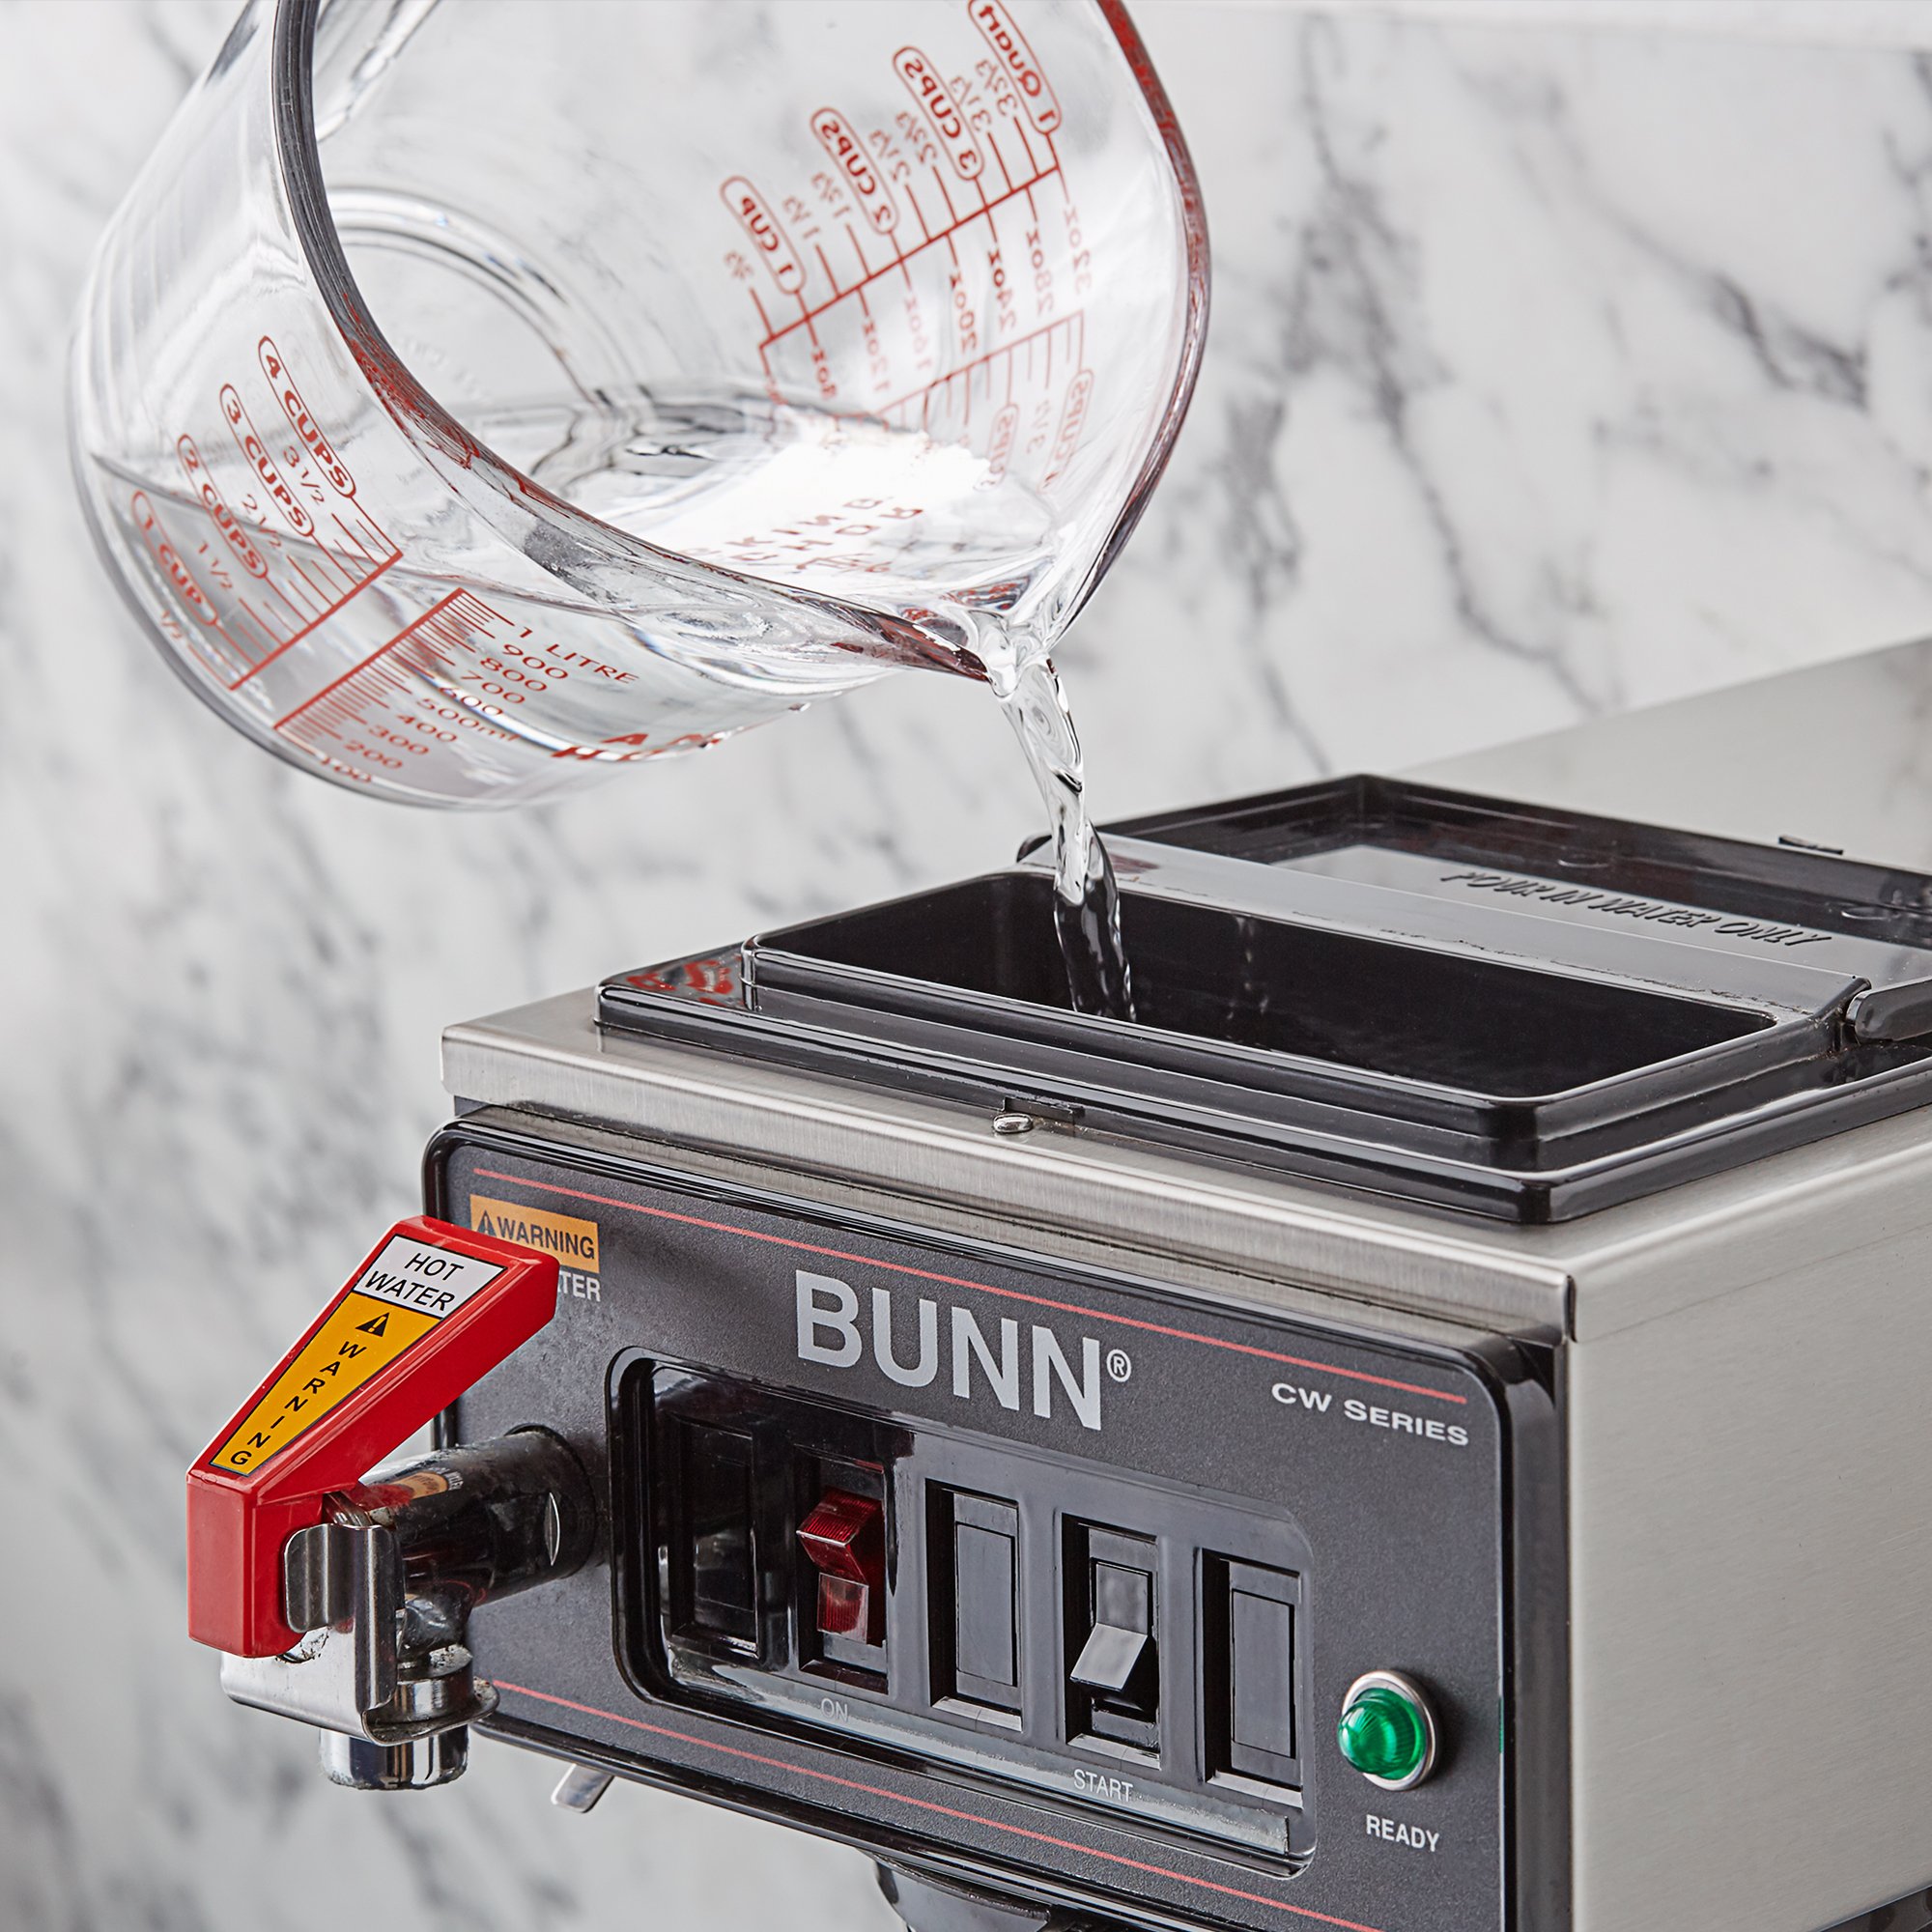 Pouring descaling solution in a Bunn coffee maker